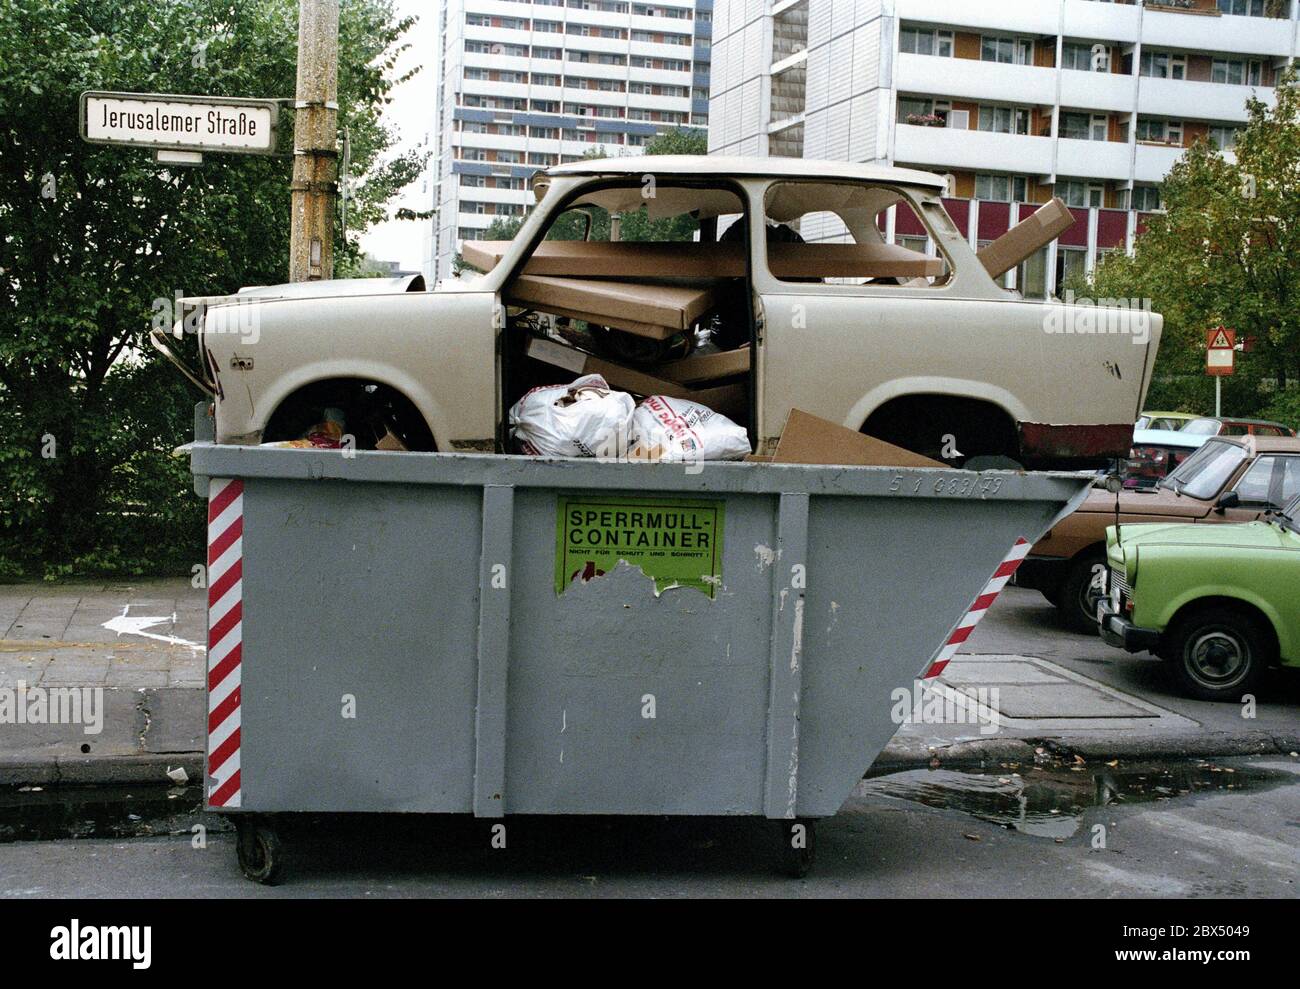 Berlin-Mitte / GDR / 1990 A Trabi, symbol of GDR prosperity, is disposed of, near Leipziger Strasse, a symbol for the end of the GDR // Muell / Abfall / Einigung / Wende / Wirtschaft / *** Local Caption *** East Germany / CommunismThe car Trabi-Trabant was the standard car in communist Germany, a sign for moderate wealth. After the unification those cars were only junk, like big parts of the whole economy.the communist symbol in a junk carbage container [automated translation] Stock Photo